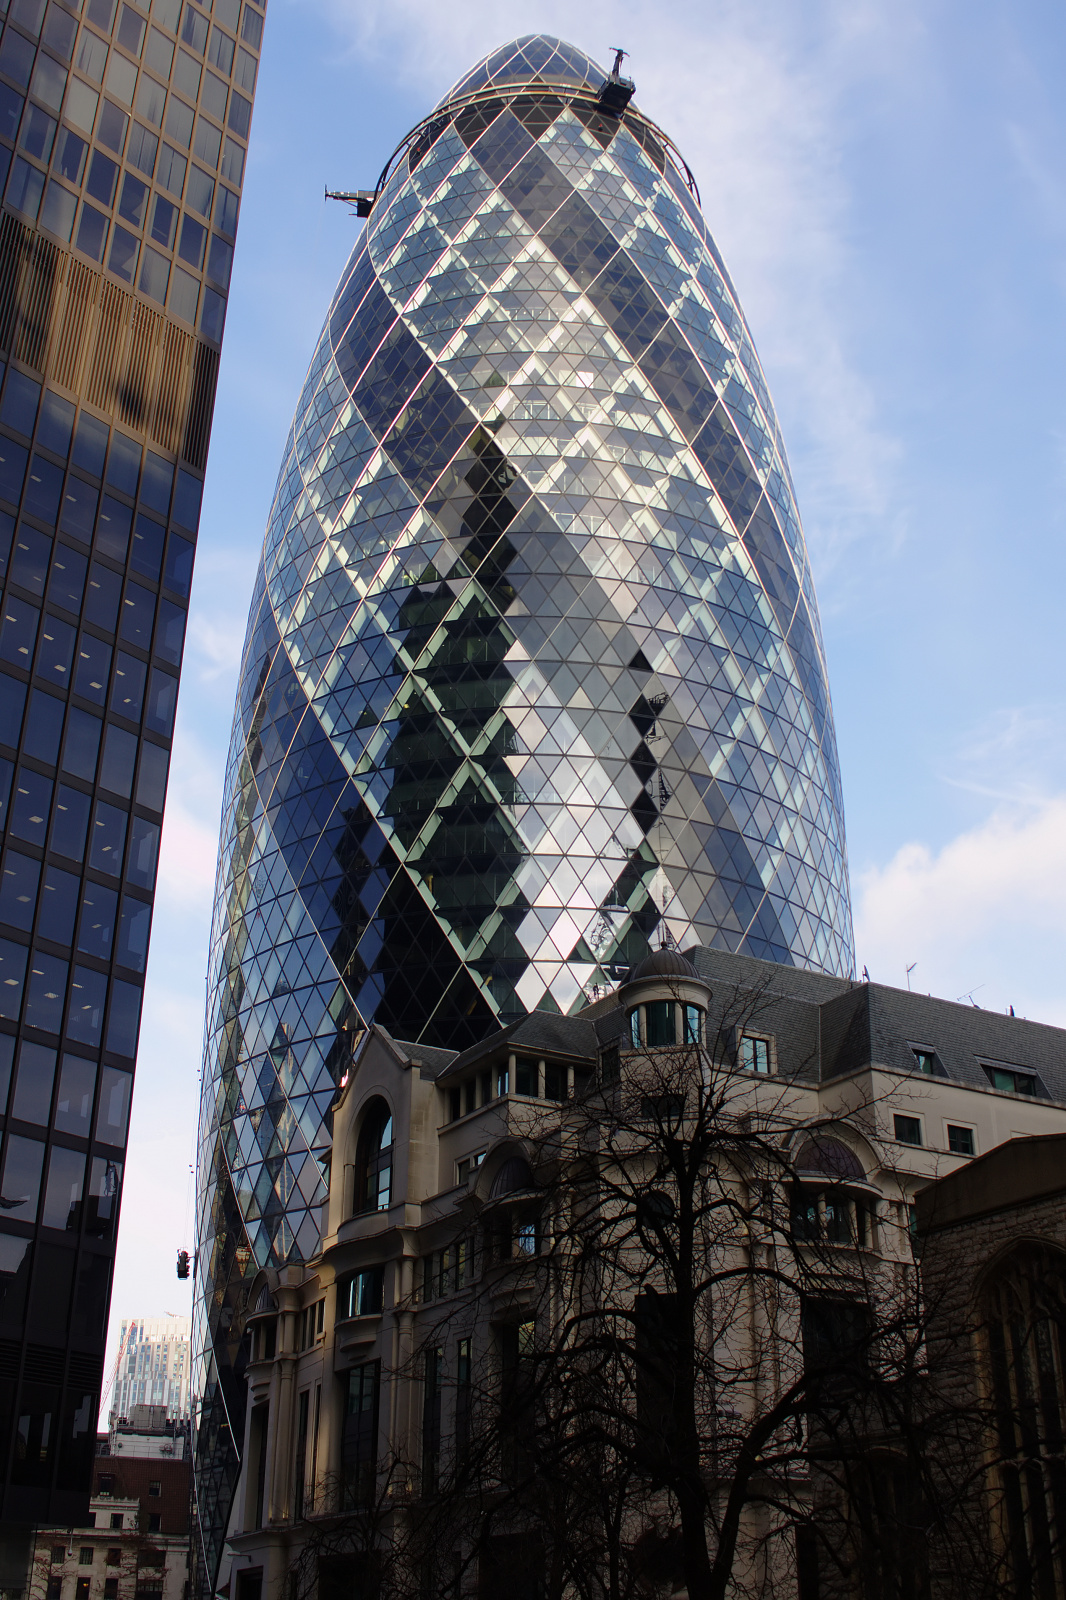 The Gherkin (Travels » London » London at Day)